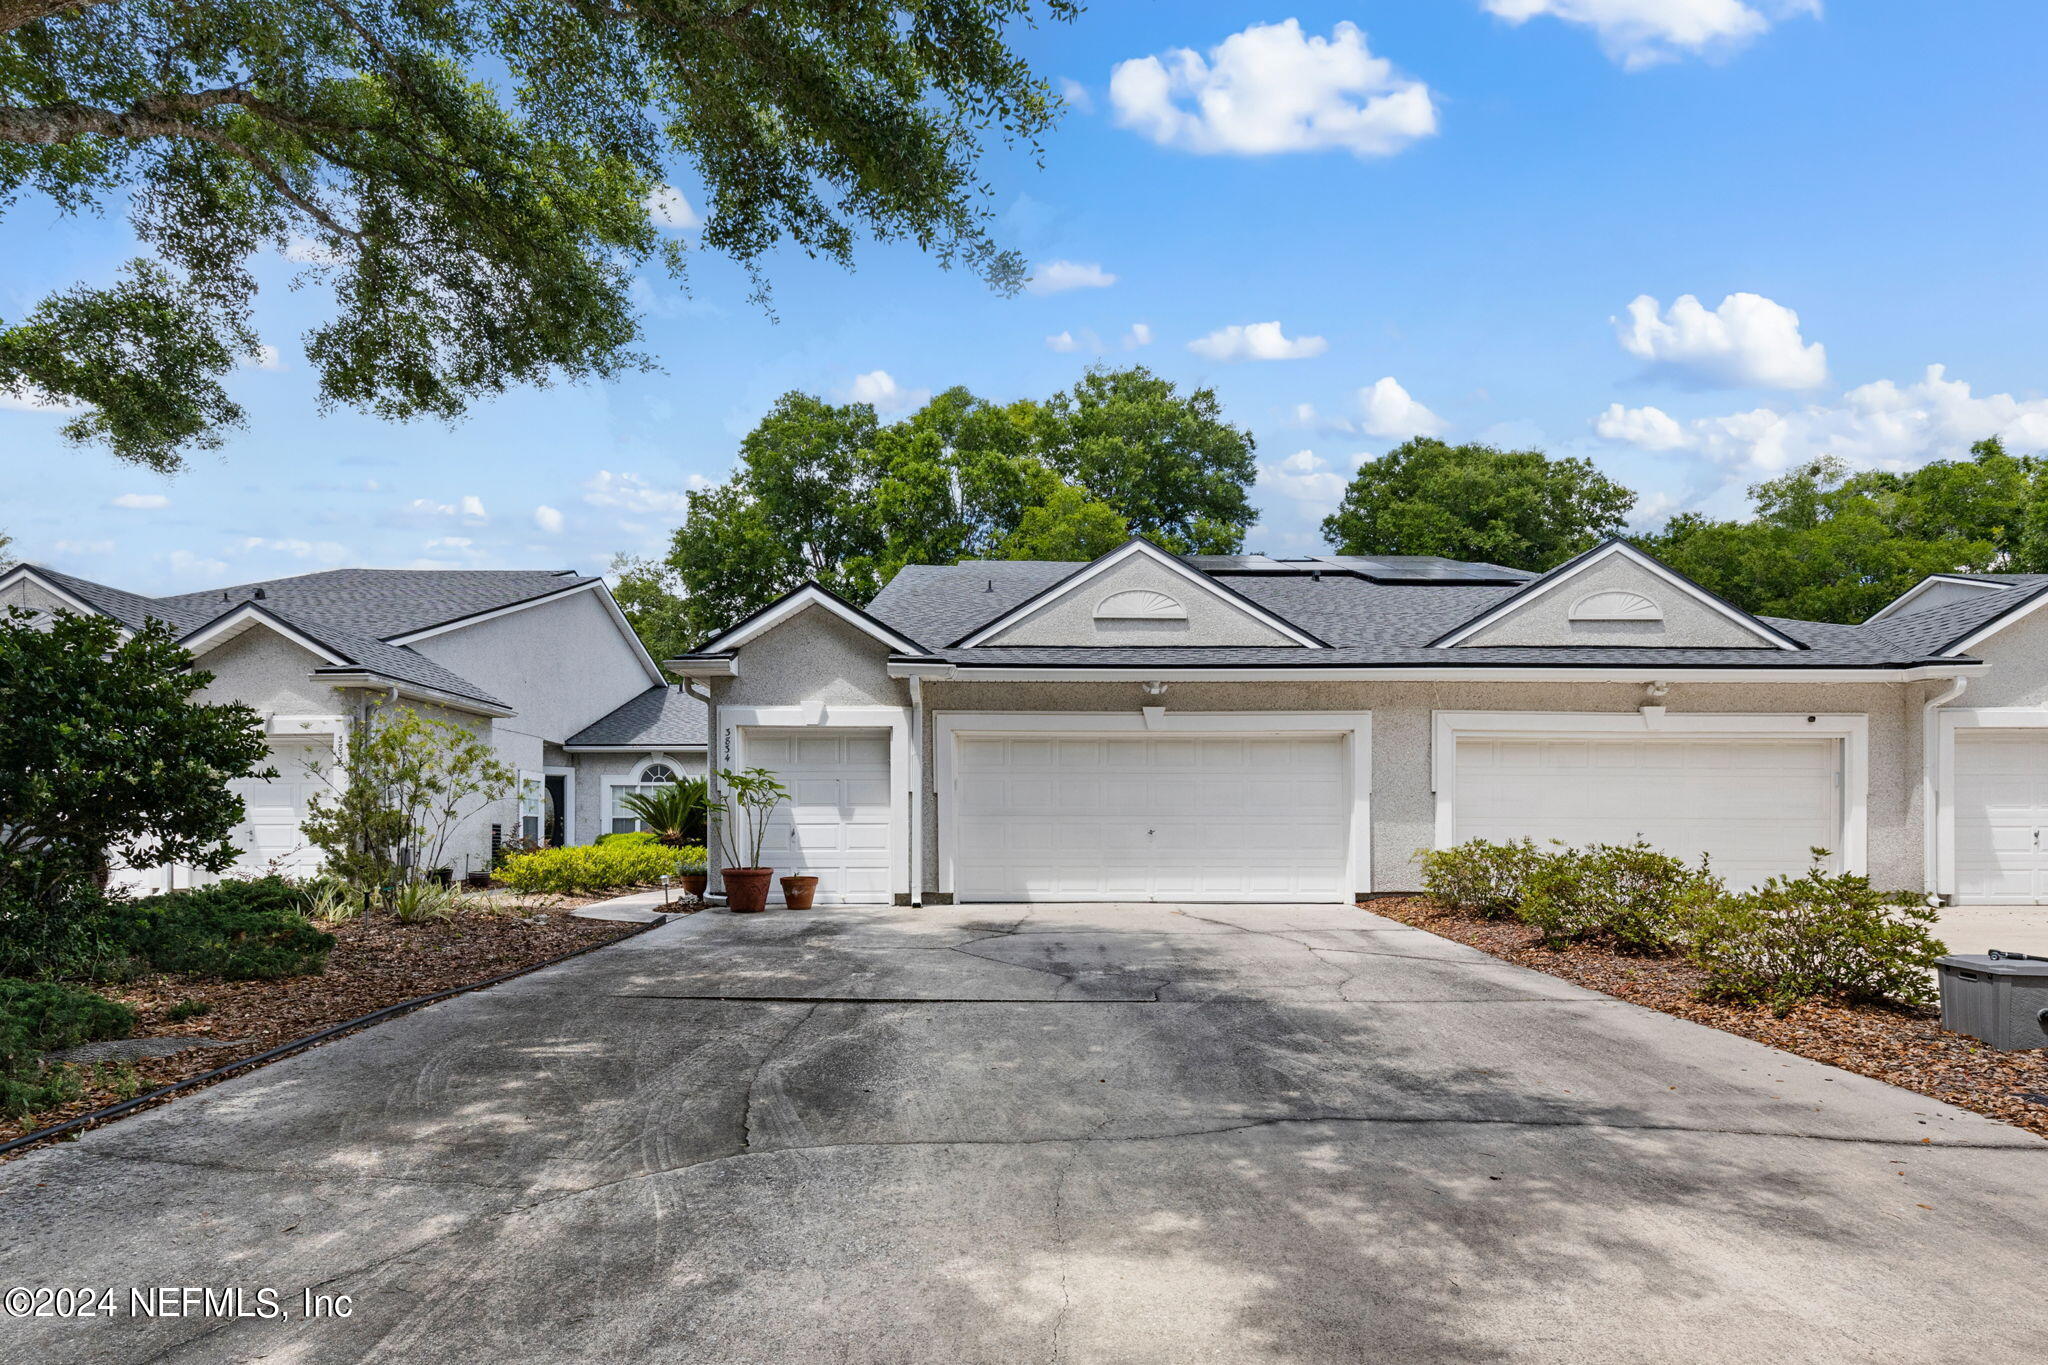 Middleburg, FL home for sale located at 3834 Green View Terrace, Middleburg, FL 32068